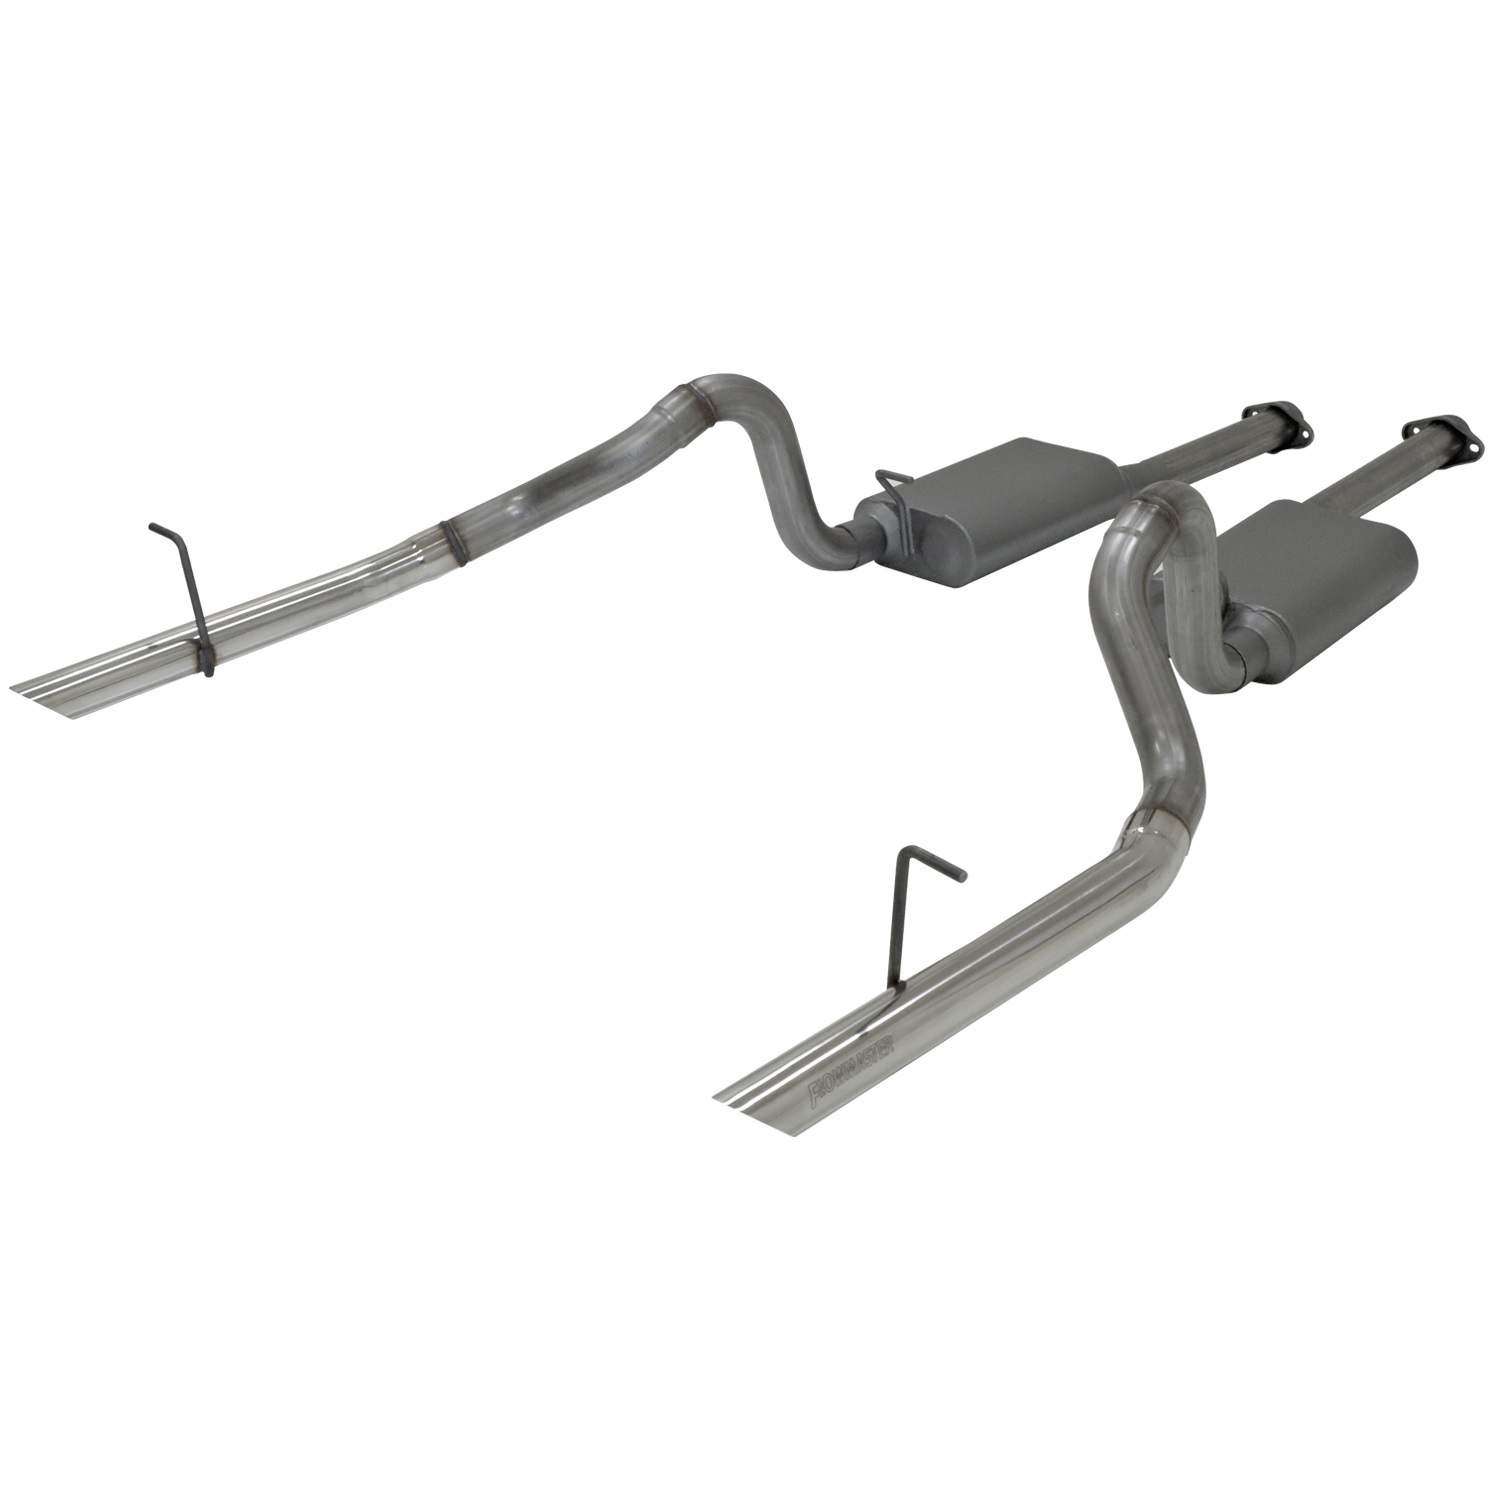 Flowmaster Flowmaster 817212 American Thunder Cat Back Exhaust System Fits 94-97 Mustang